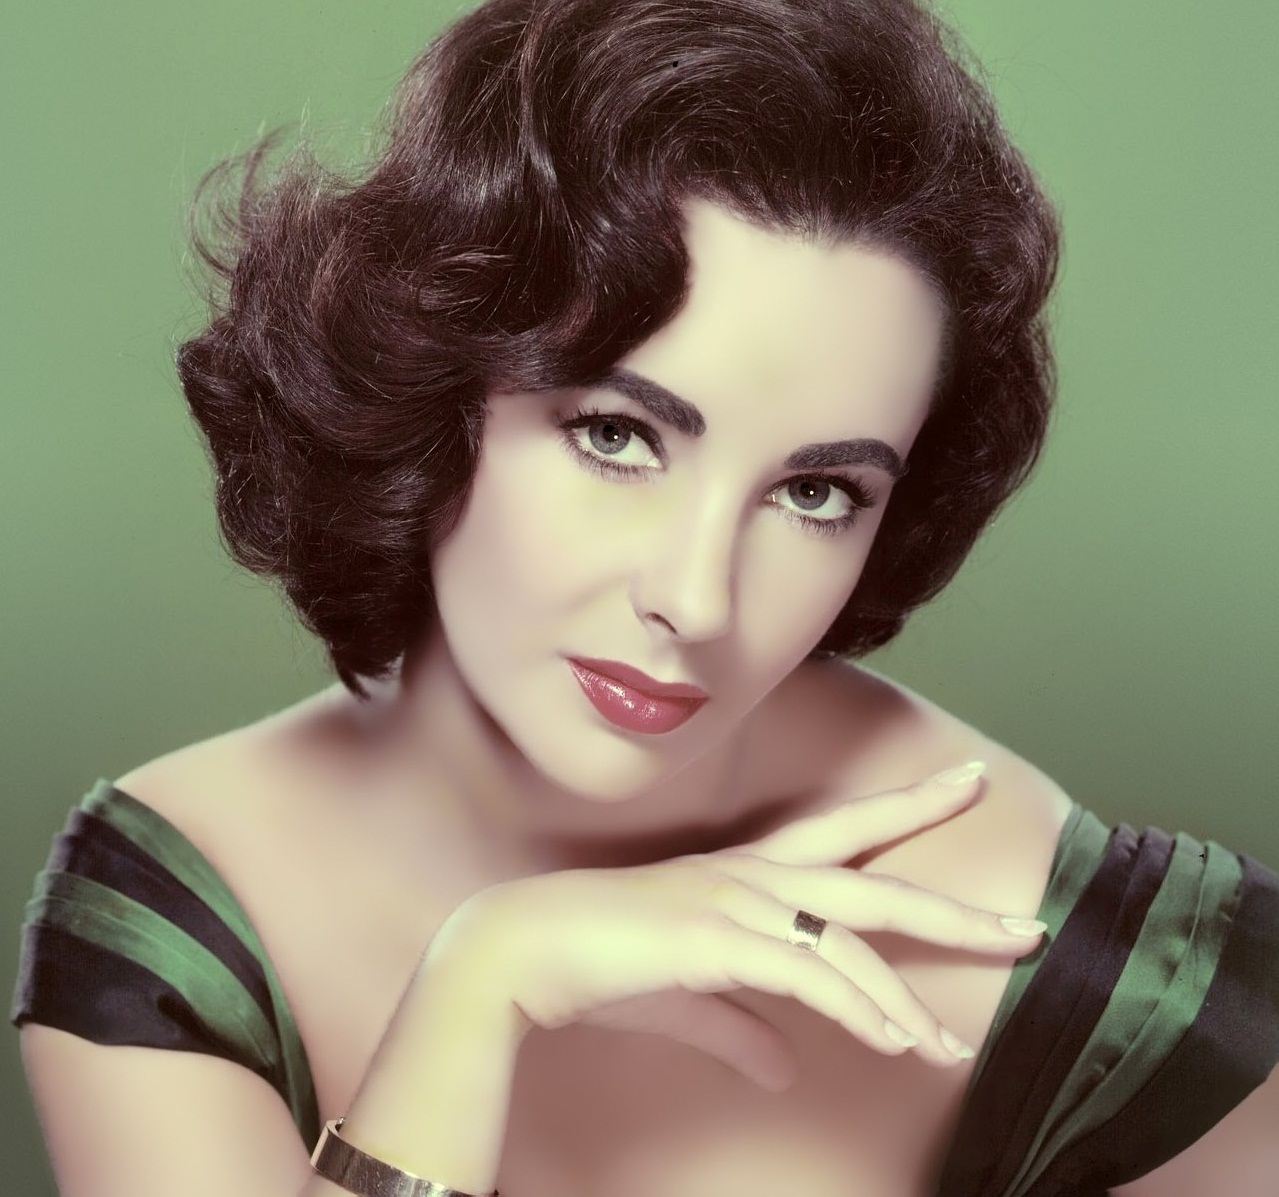 Elizabeth Taylor - An Icon of Beauty and Fashion